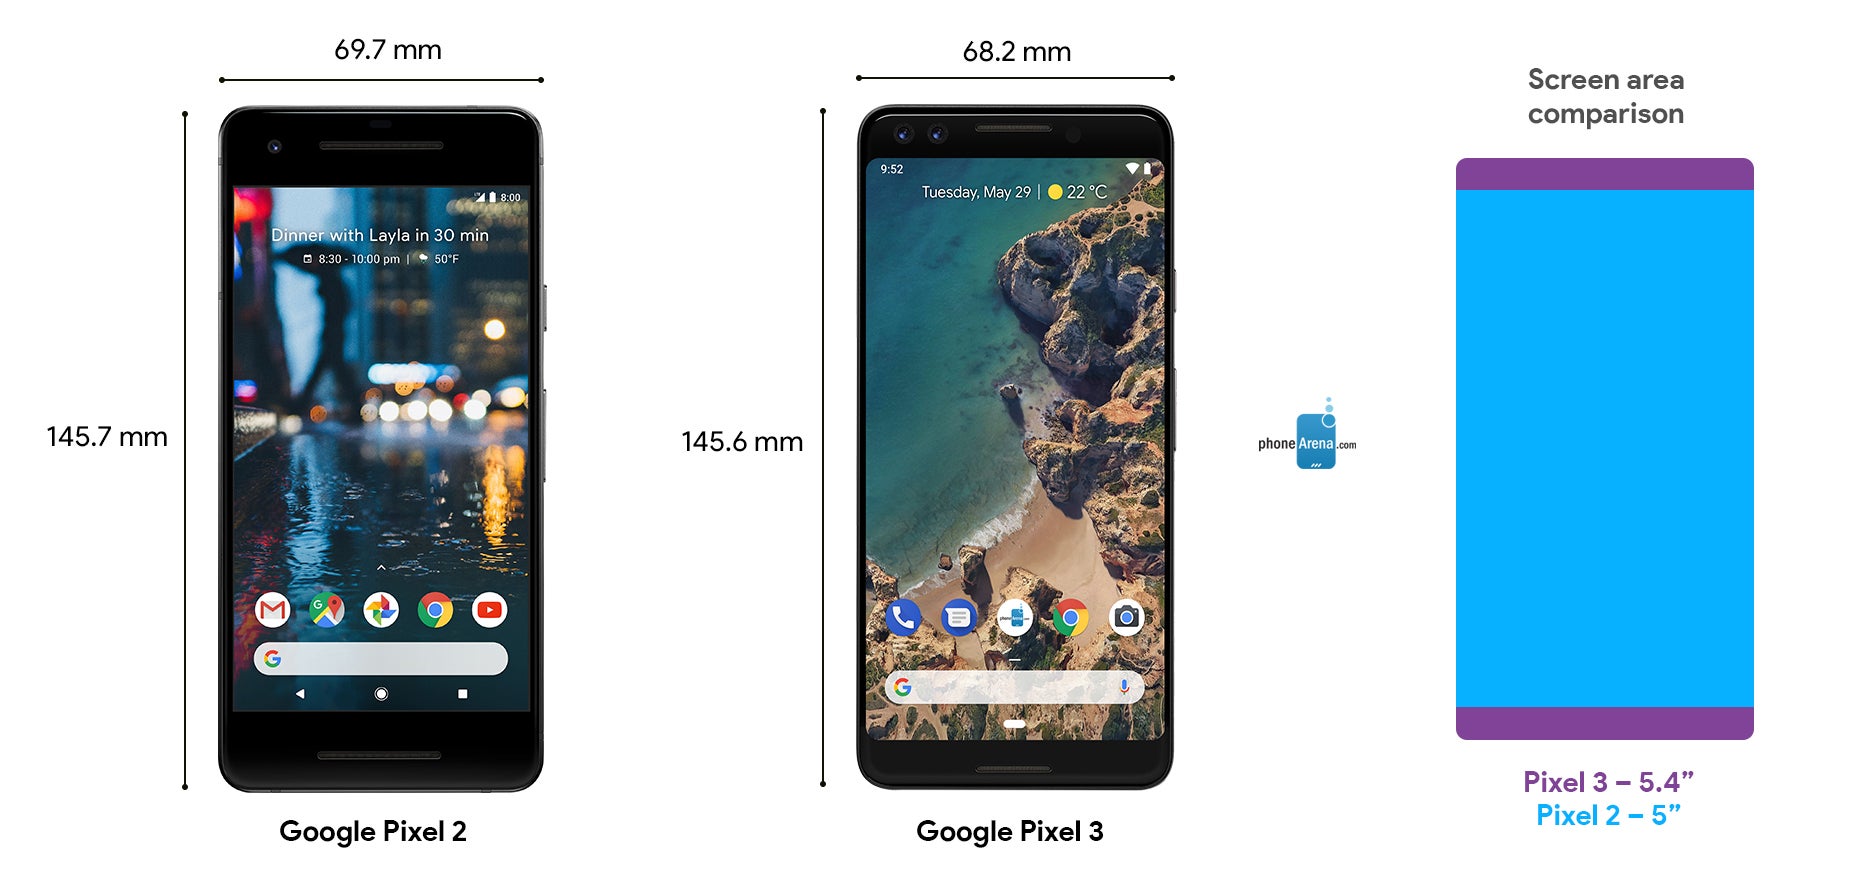 Google Pixel 3 and Pixel 3 XL: how big are they and how do they compare to the previous models?